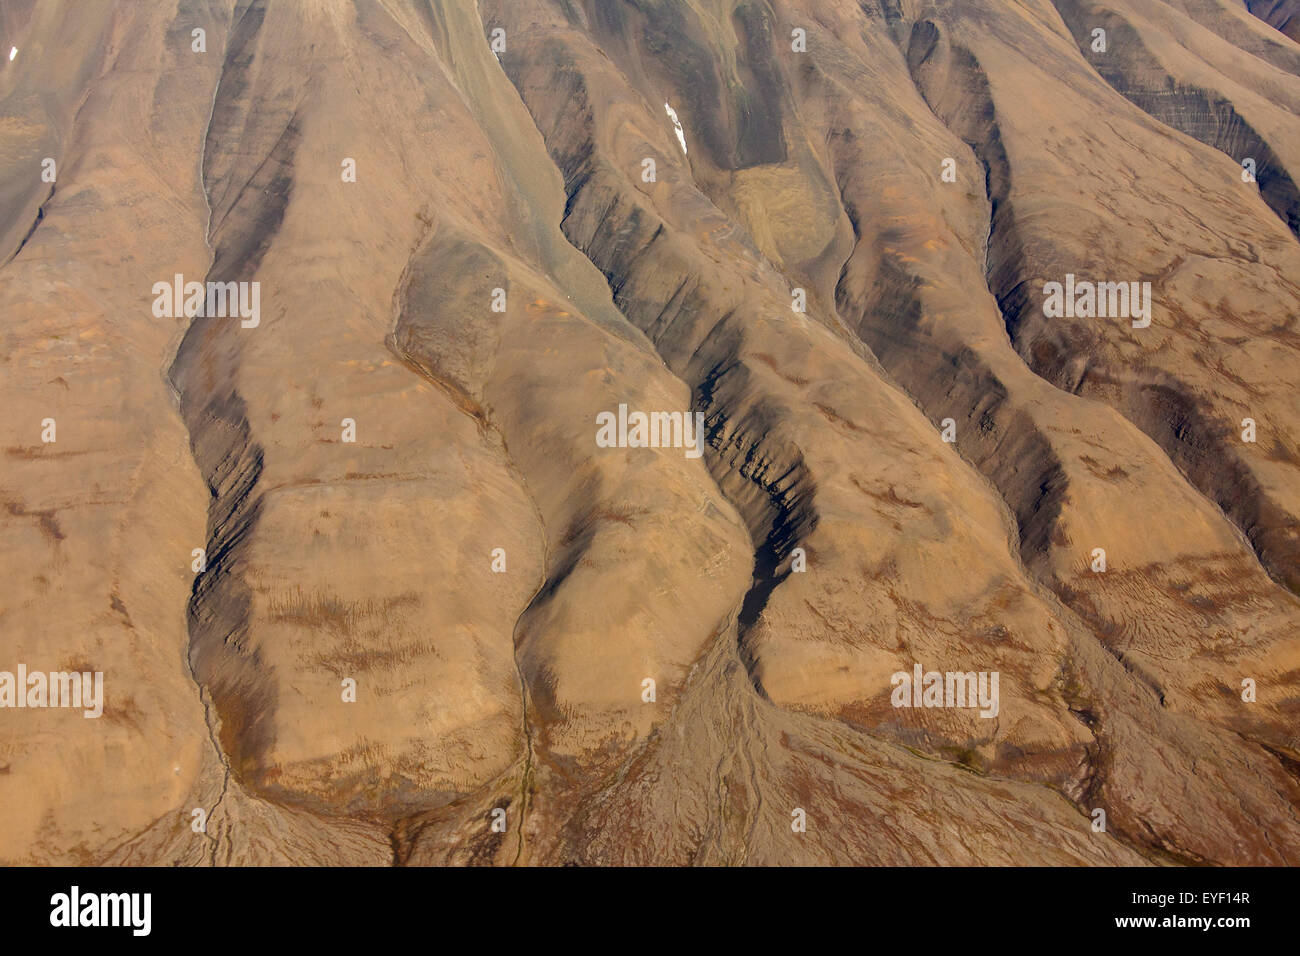 Aerial view of barren mountainside with deep gullies carved by water erosion at Spitsbergen / Svalbard, Norway Stock Photo